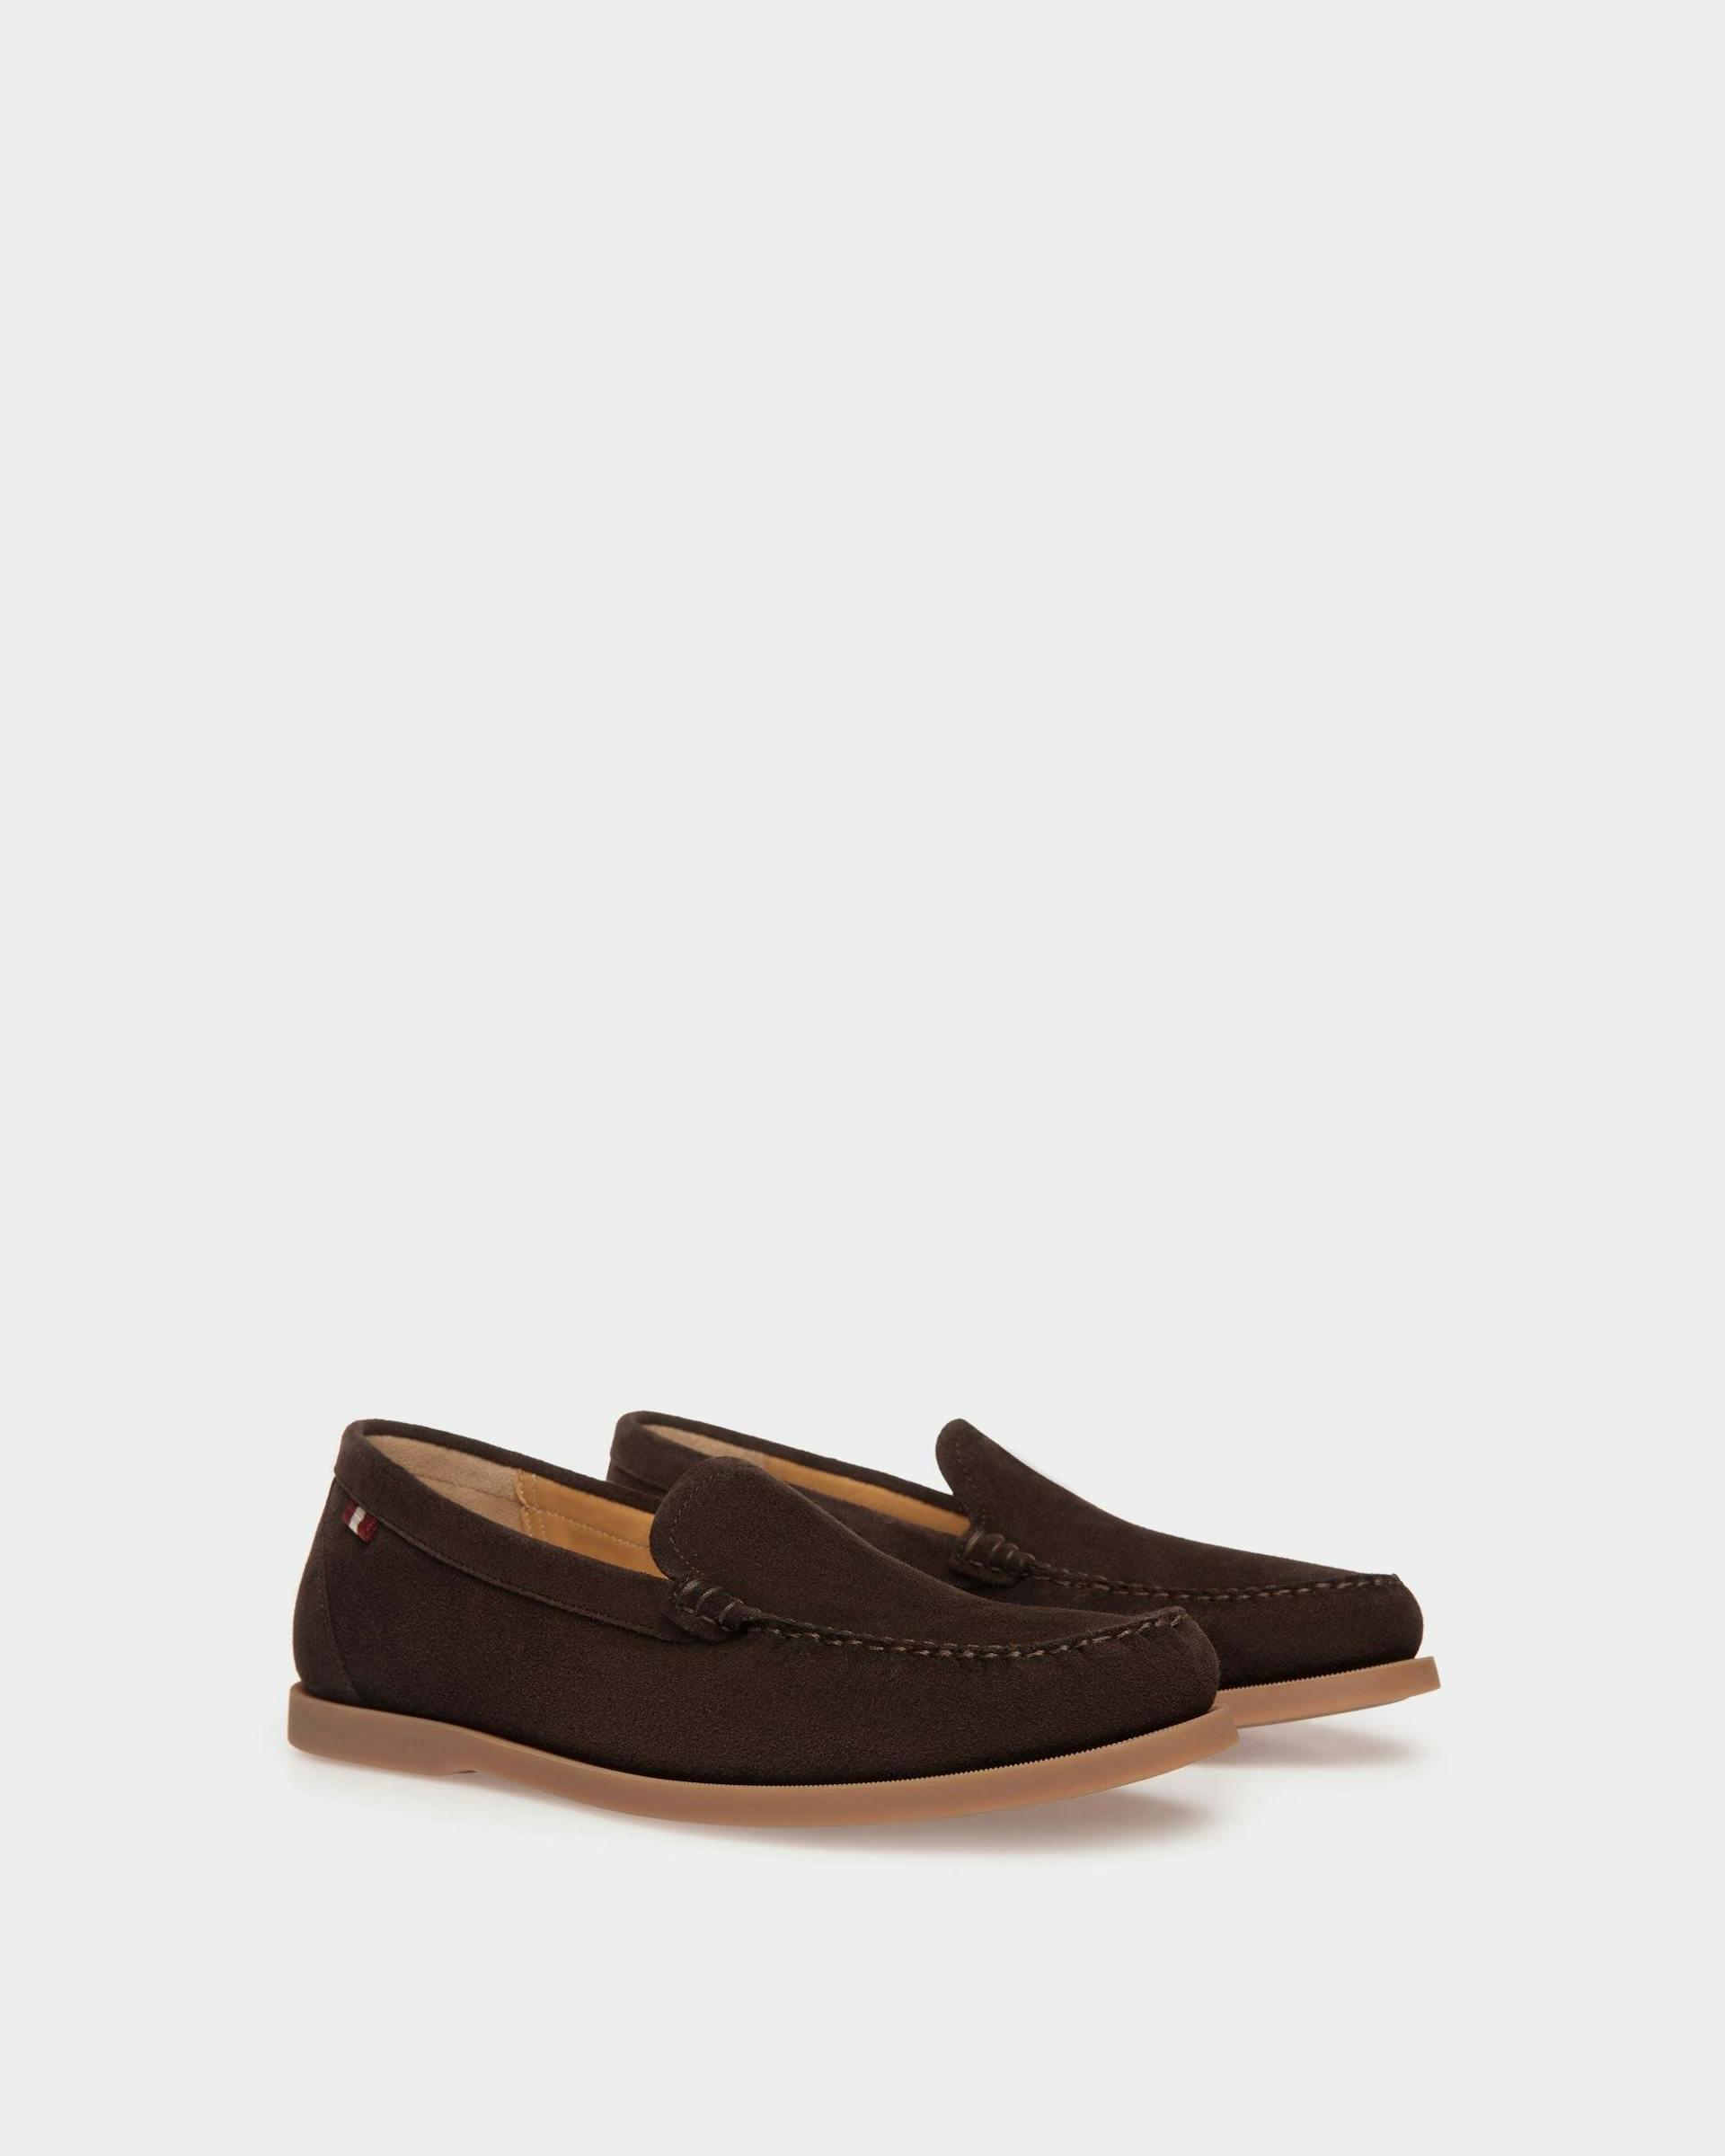 Men's Nelson Loafer in Brown Suede | Bally | Still Life 3/4 Front